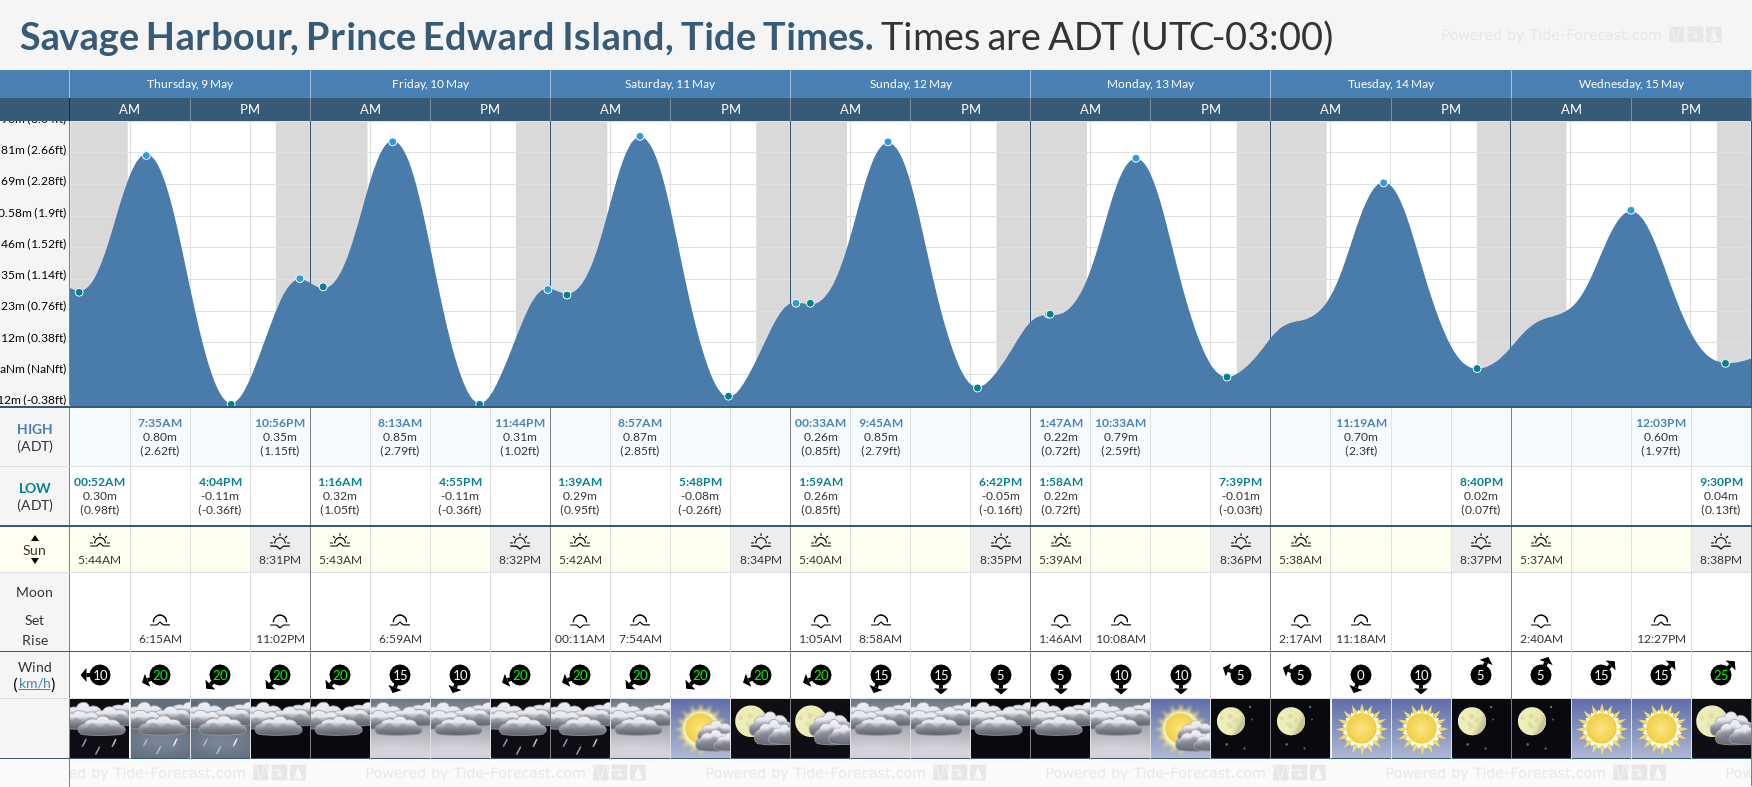 Savage Harbour, Prince Edward Island Tide Chart including high and low tide tide times for the next 7 days